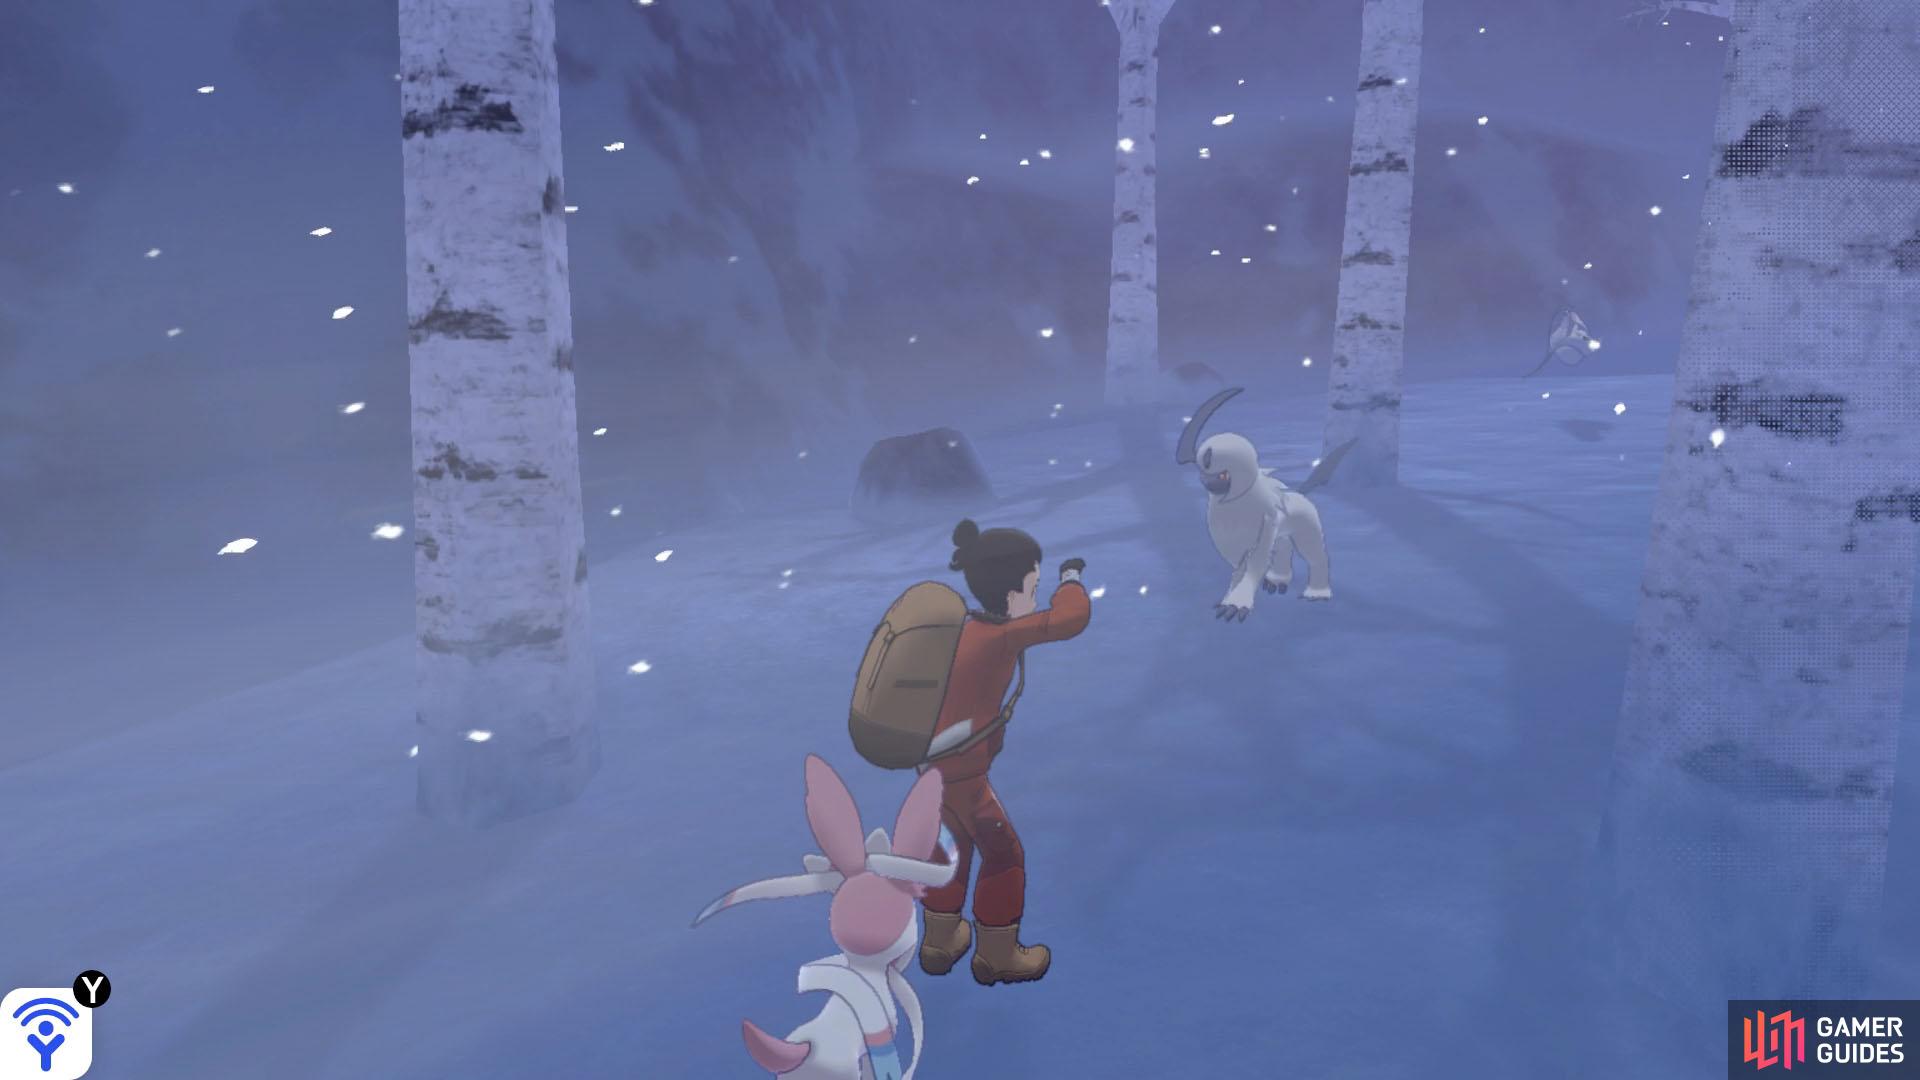 Absol seem to be attracted to snowstorms.